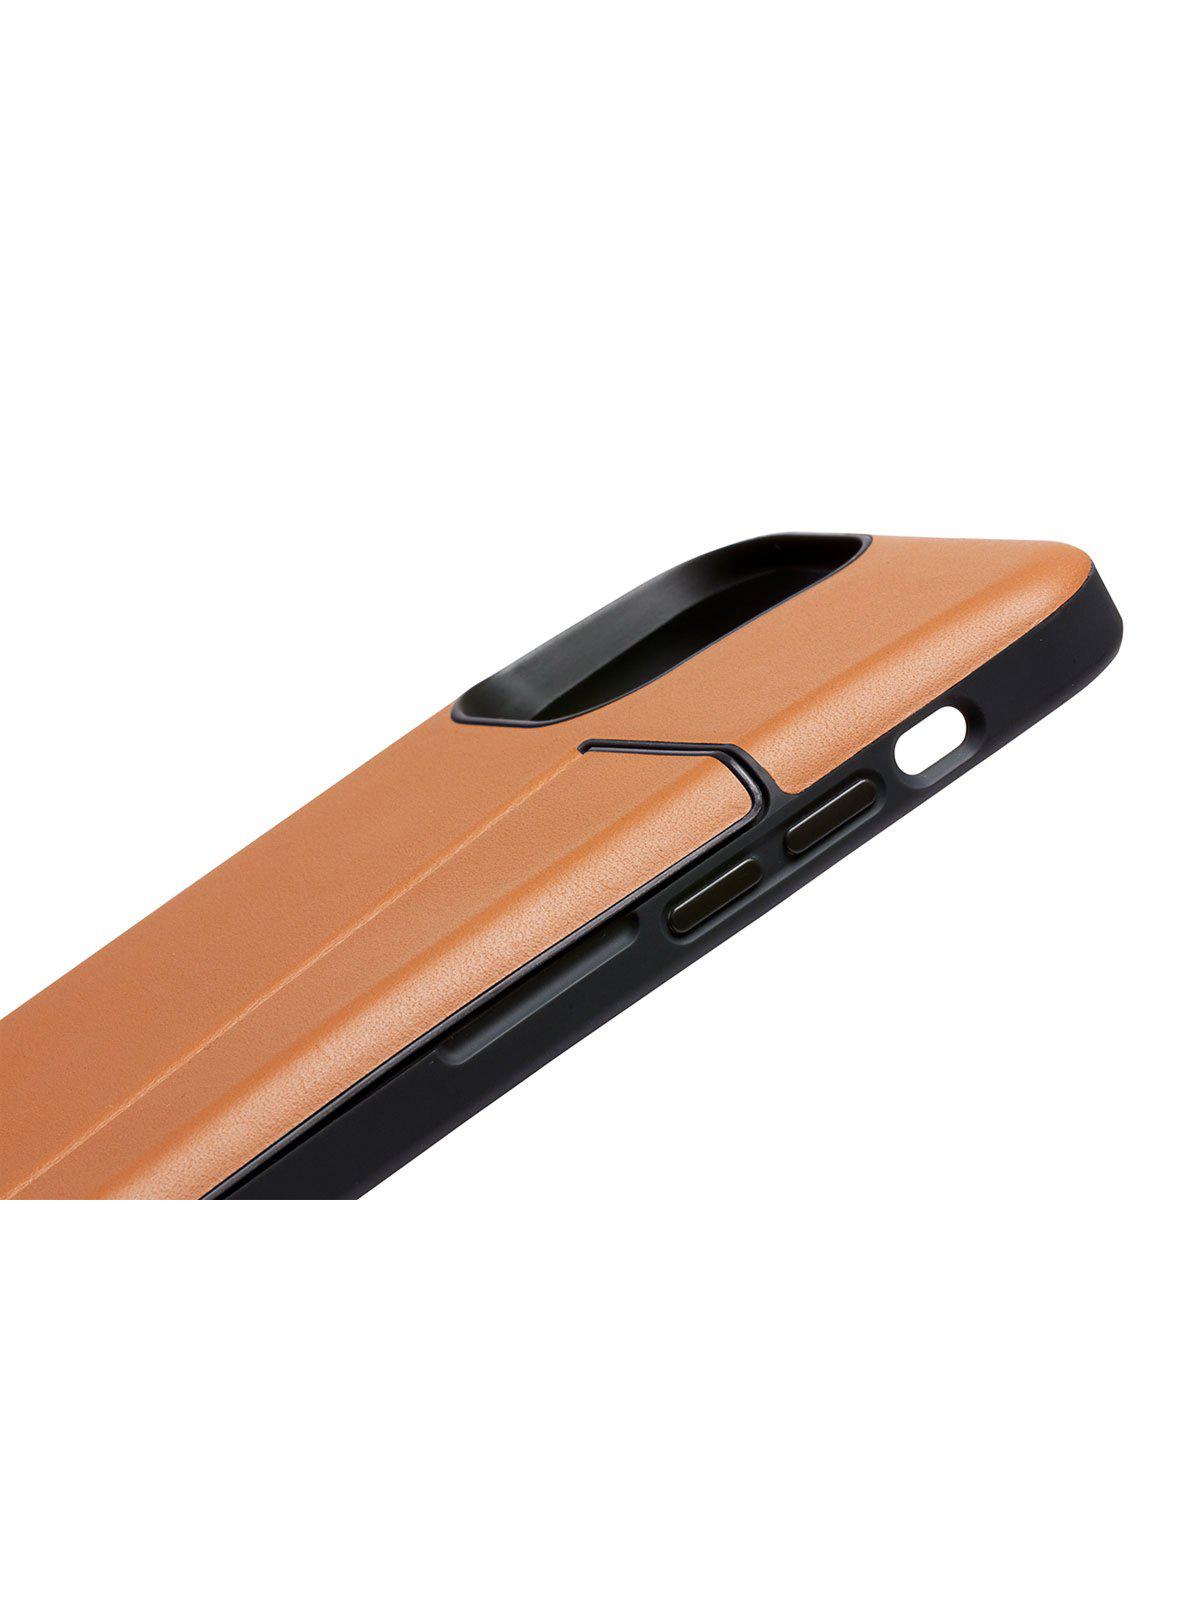 Bellroy Phone Case 3 Card iPhone 12 Mini Toffee